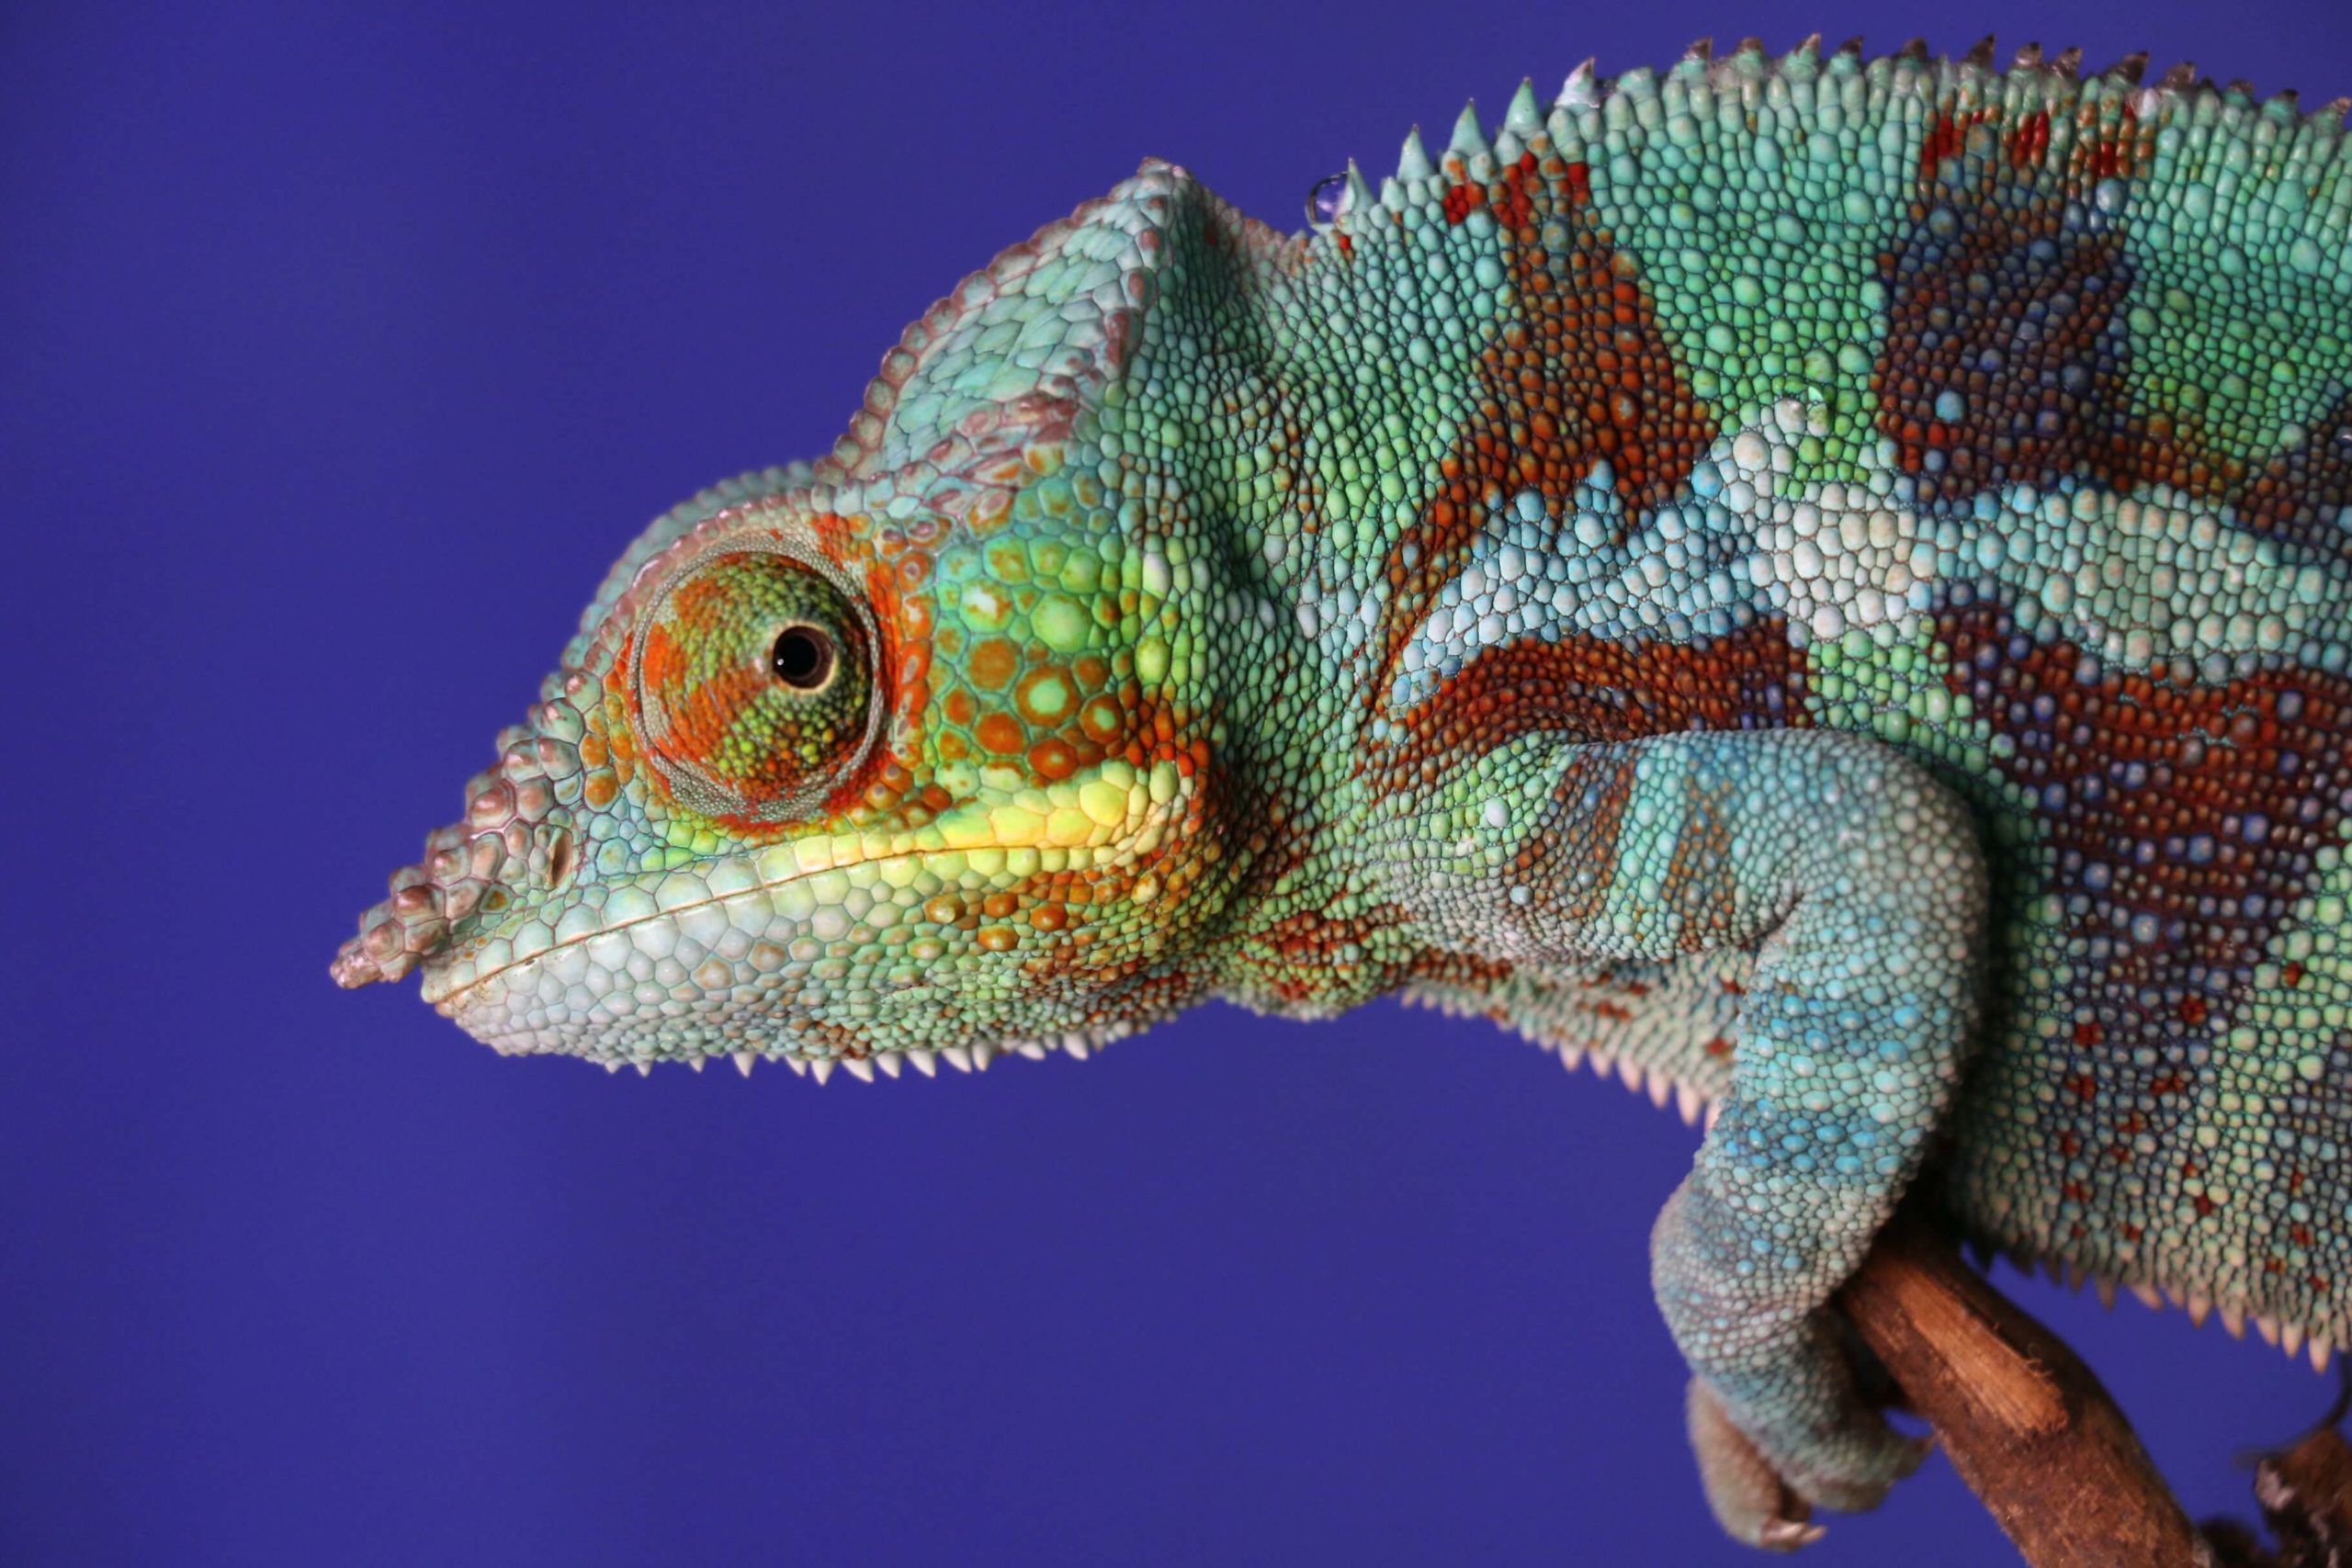 Picture of an iguana, which begins with the letter i.